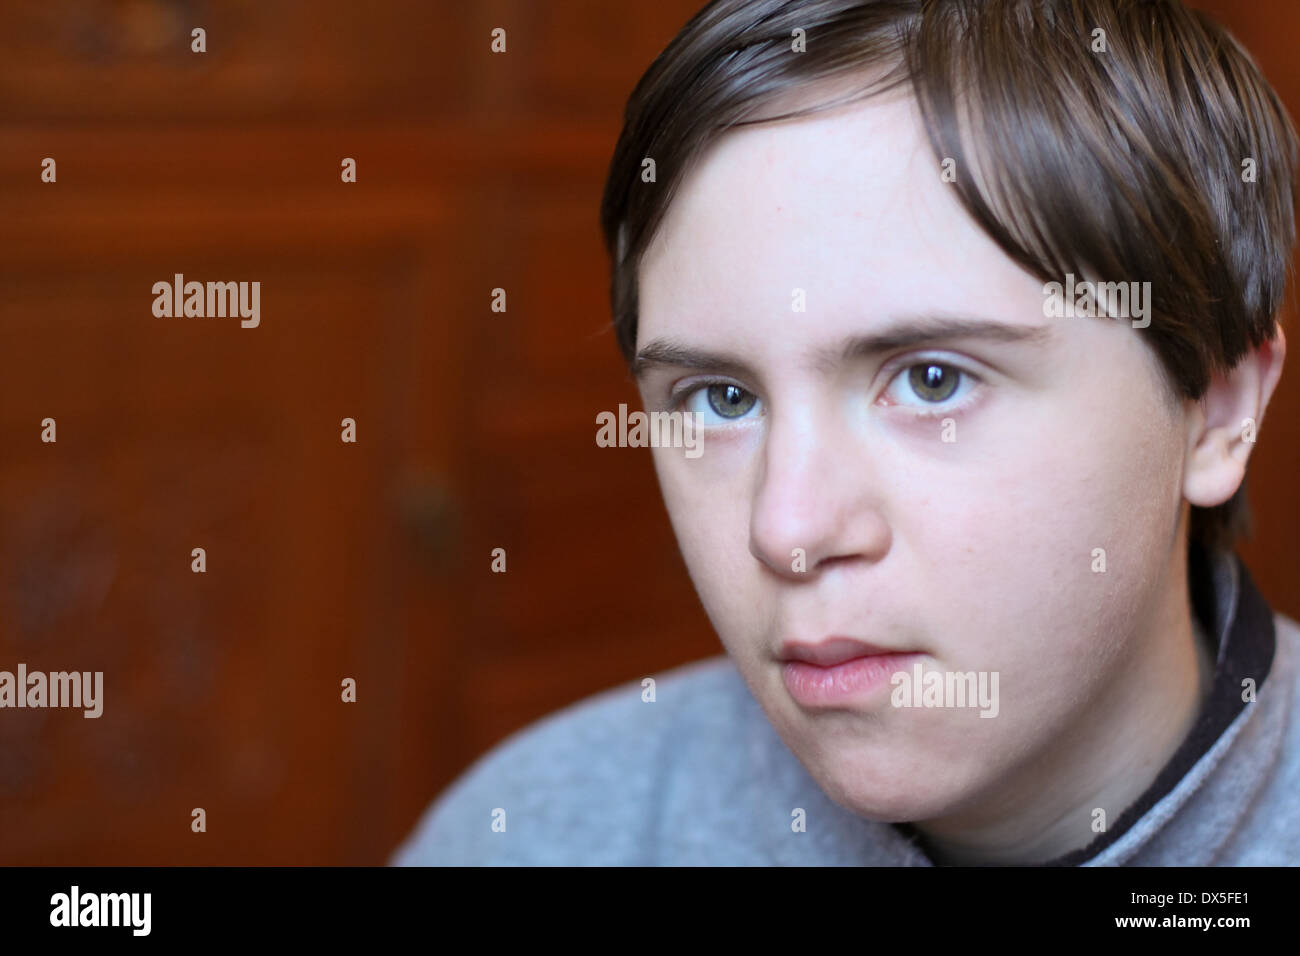 Young Man with Autism and Down's Syndrome Stock Photo